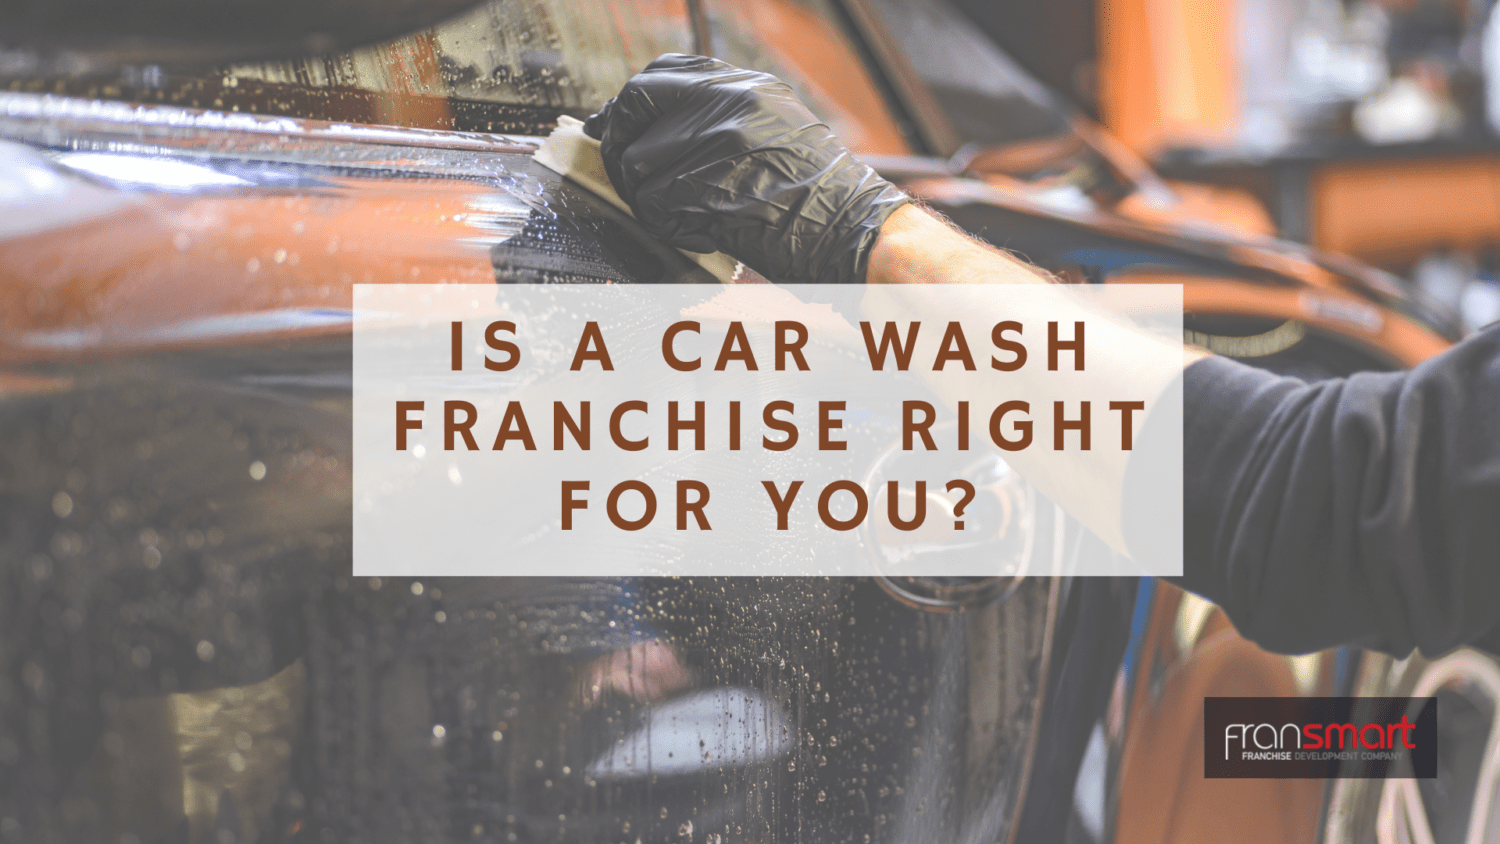 Car wash franchise right for you